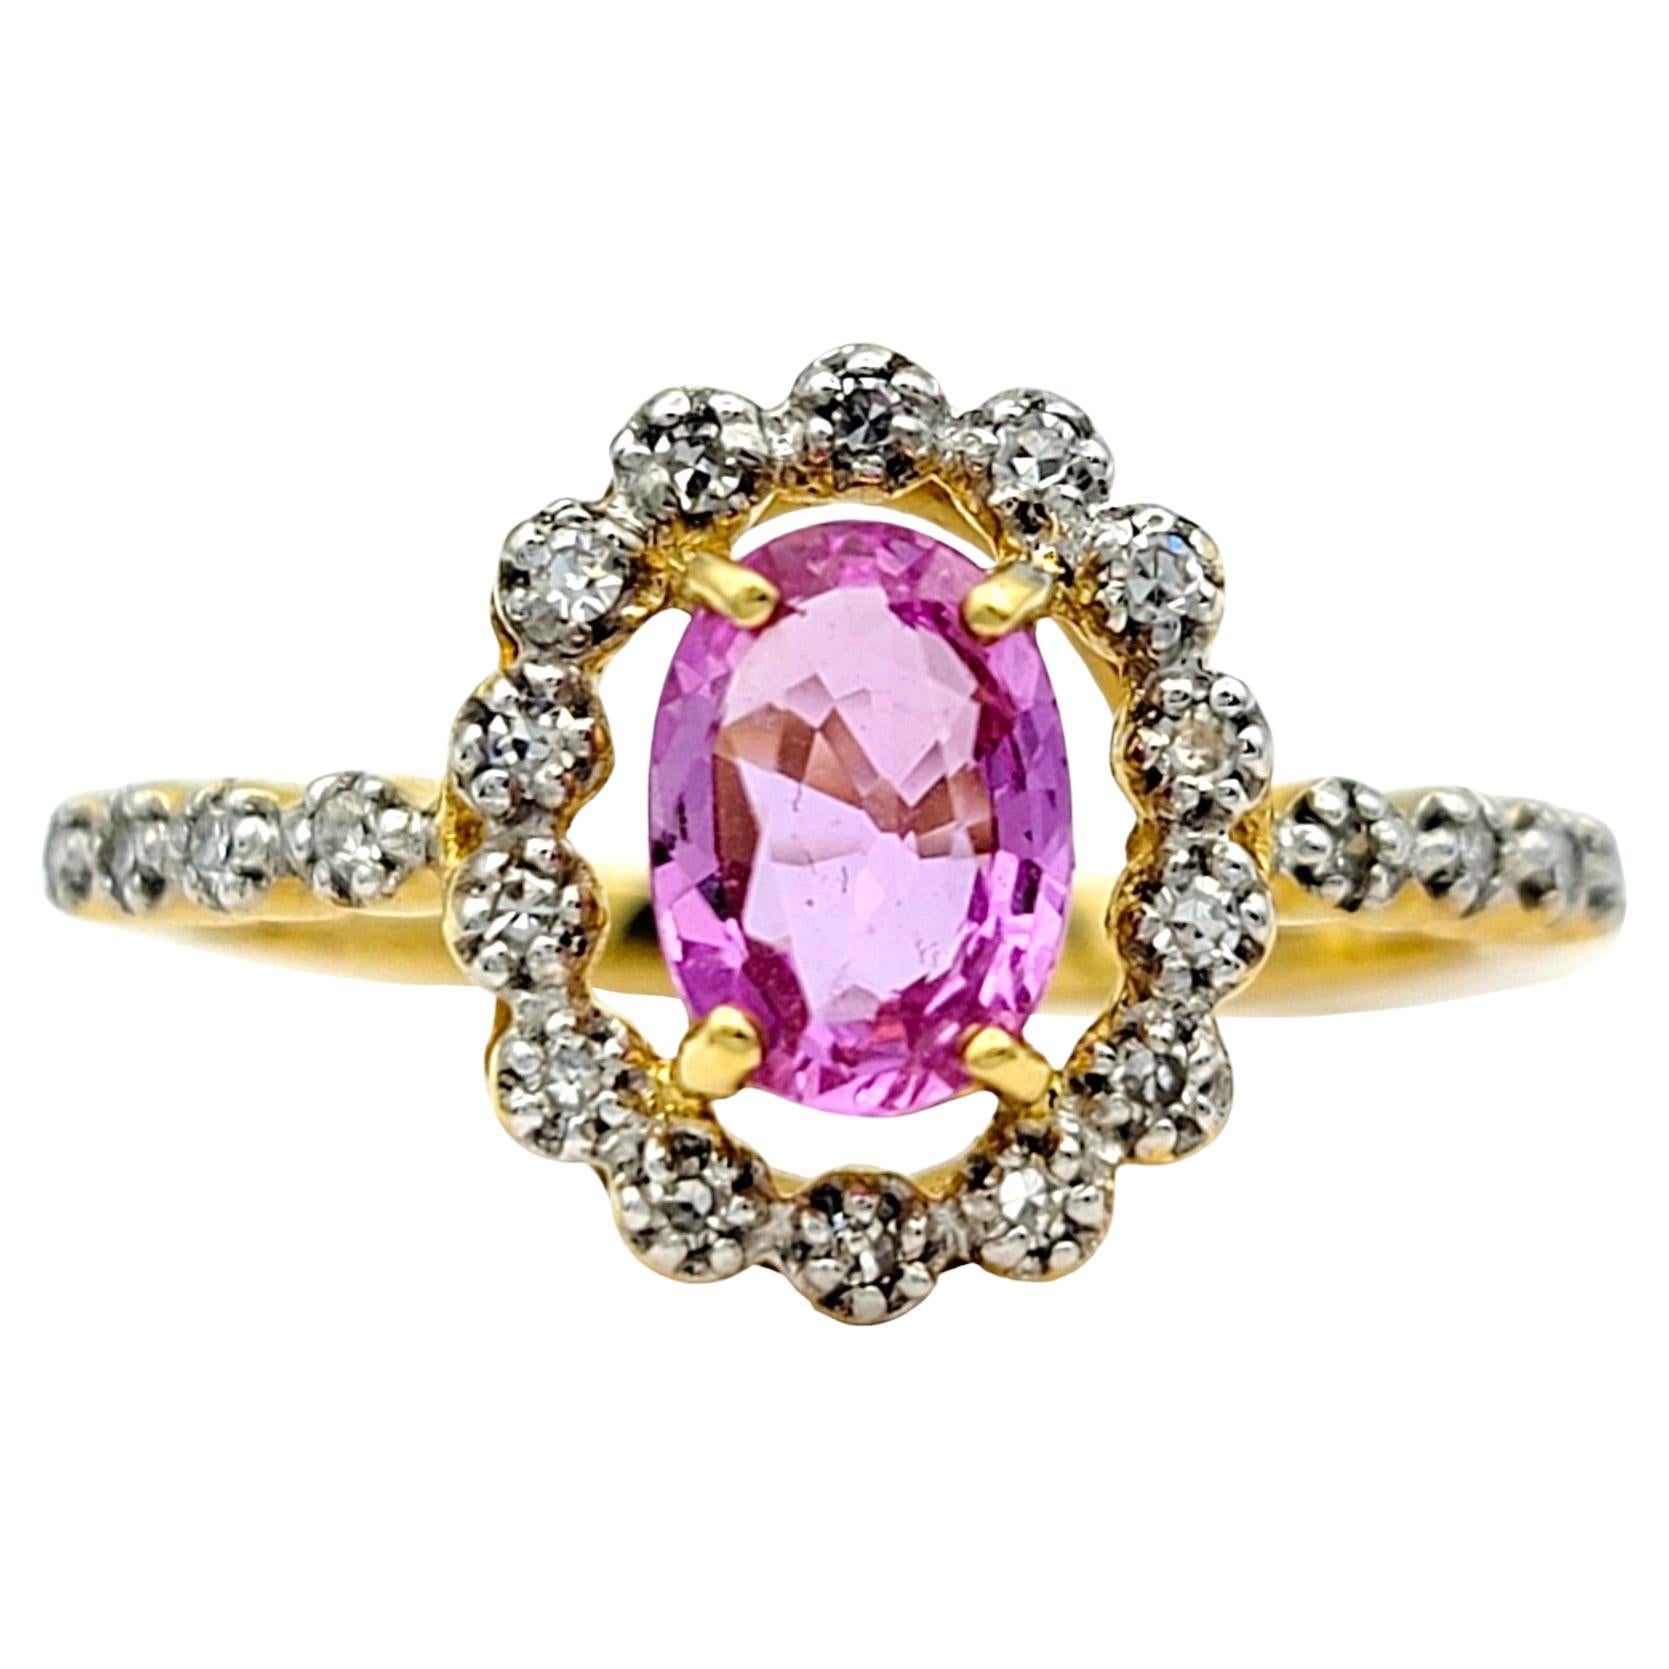 Ring Size: 7

This exquisite ring features a captivating pink oval sapphire as its focal point, nestled within a shimmering halo of dazzling diamonds. The sapphire's soft hue contrasts beautifully with the warmth of the 18 karat yellow gold setting,